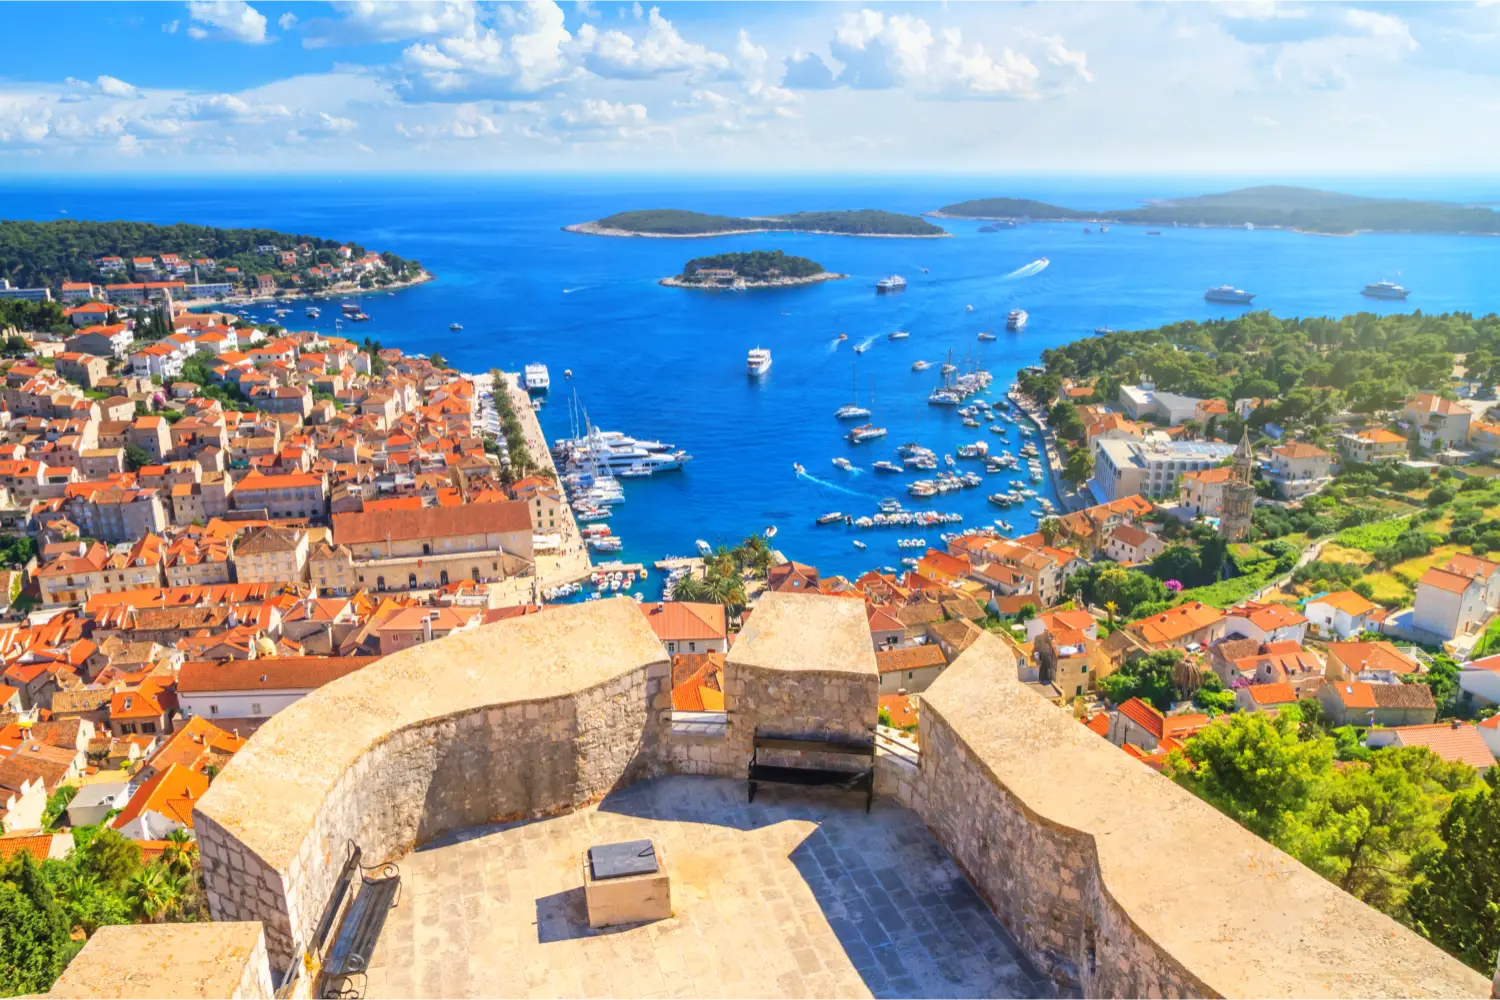 Amazing aerial view of the ancient city of Hvar in Croatia